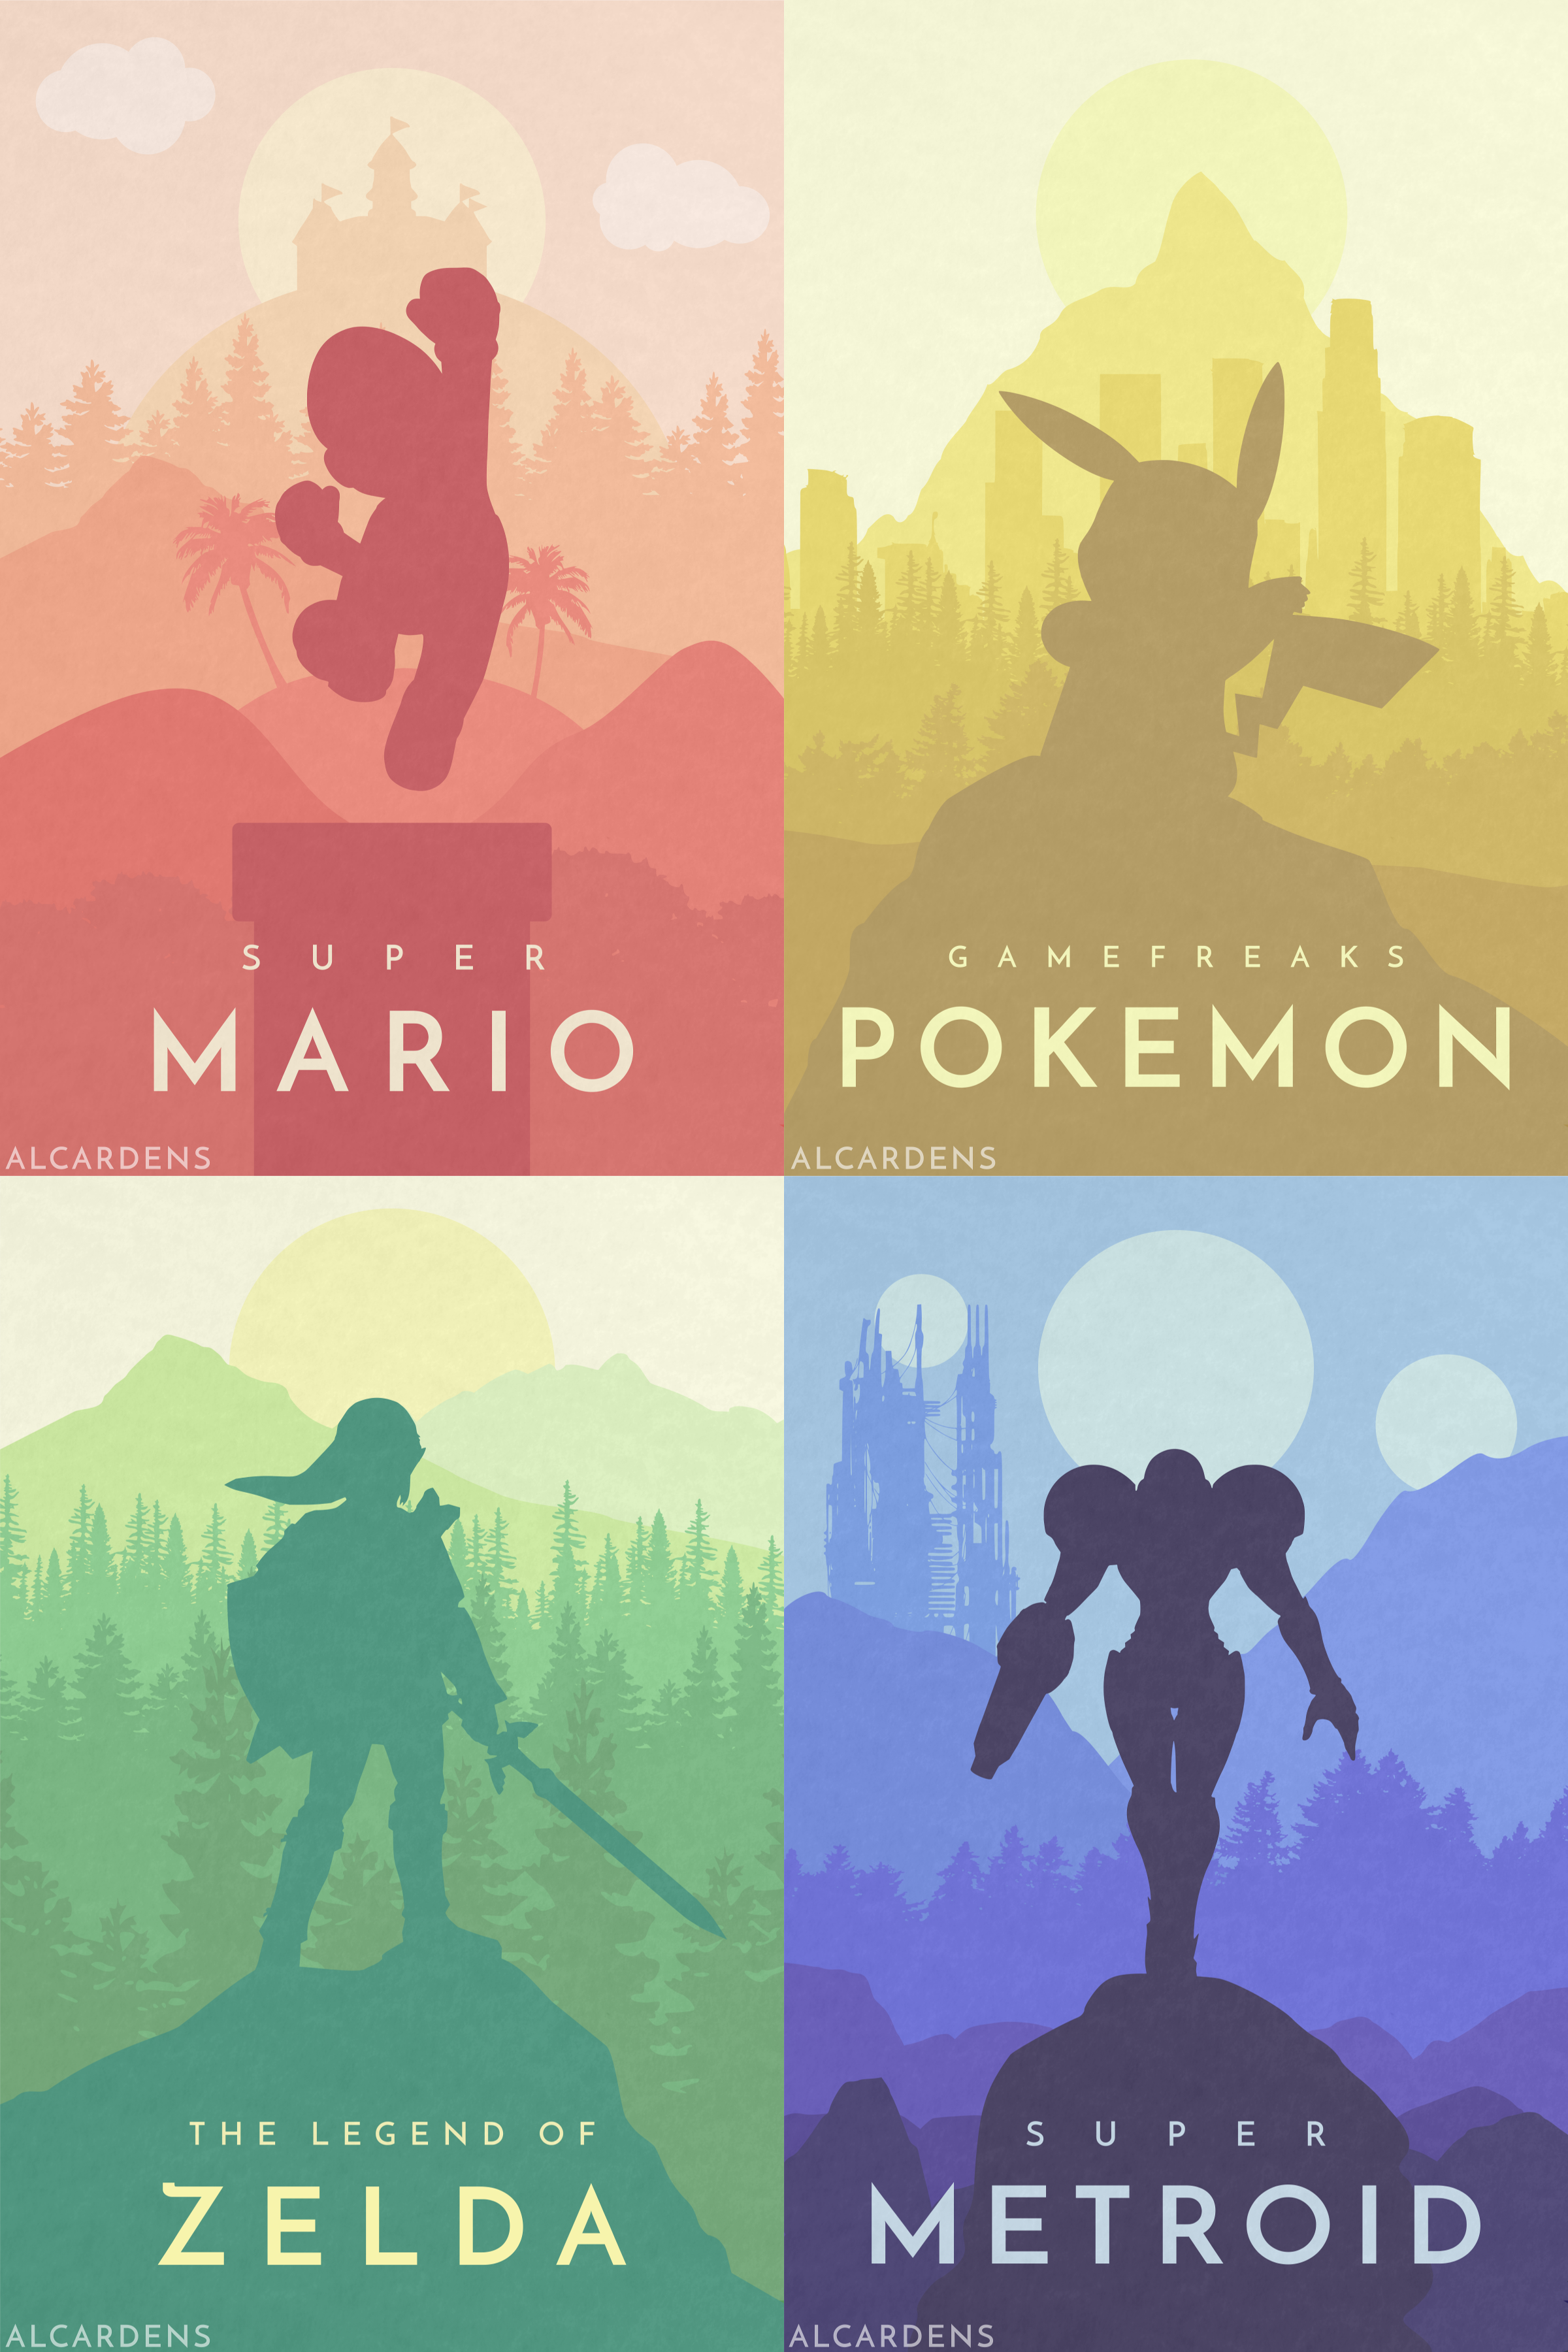 Some Nintendo Posters Wallpaper I Made! HYPE!